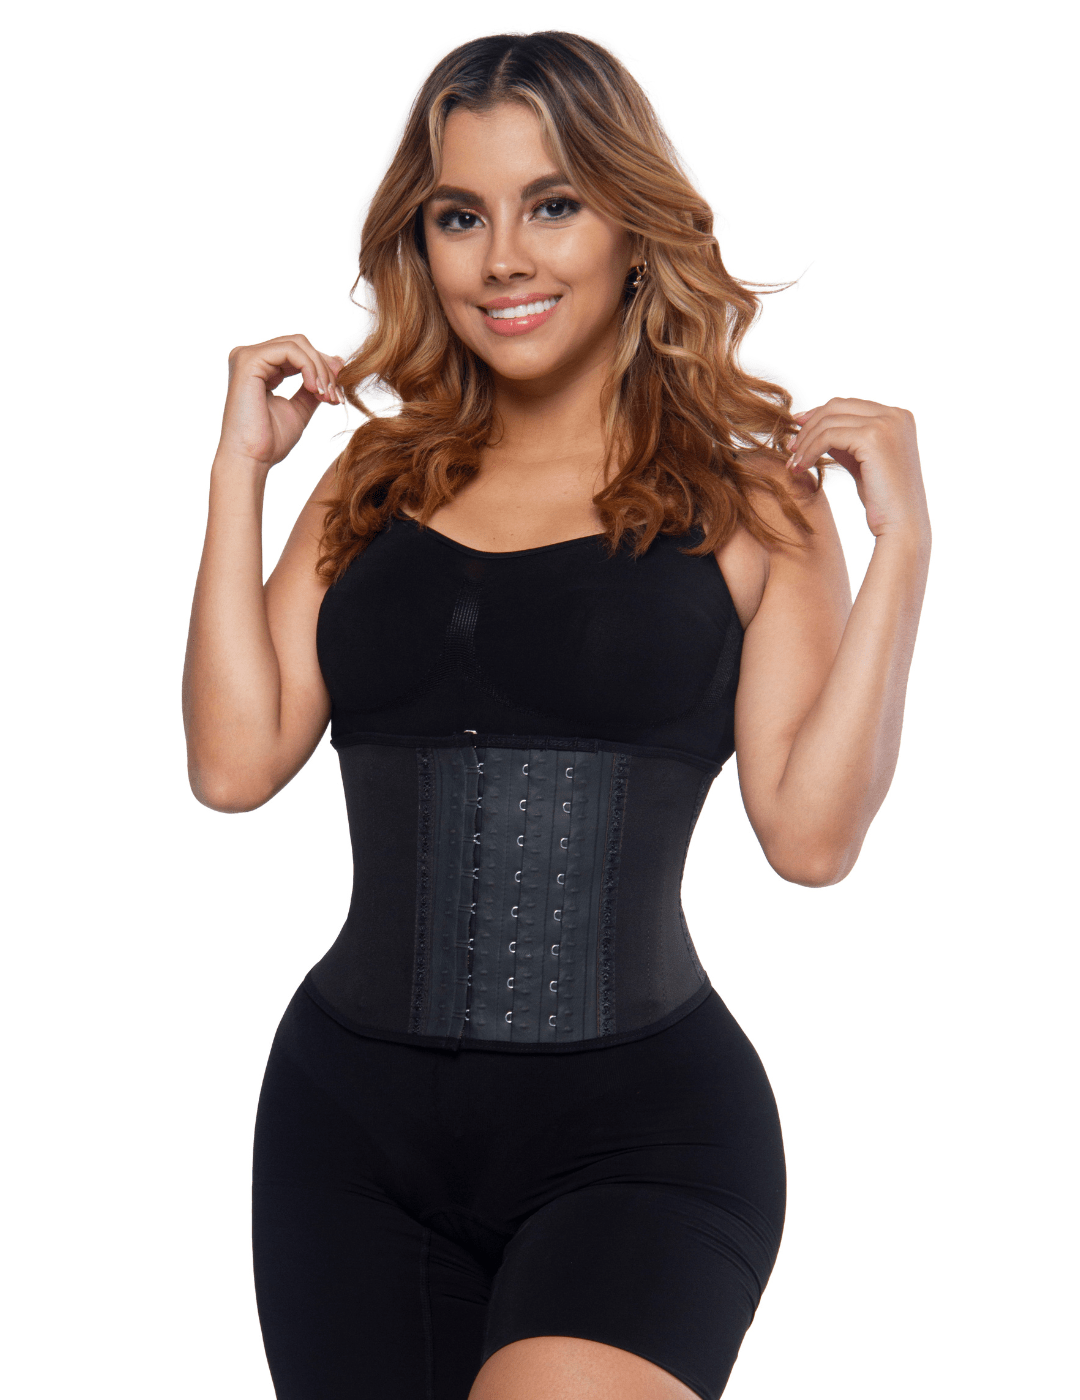 8 Pro Package. Get 2 Waist Trainers !